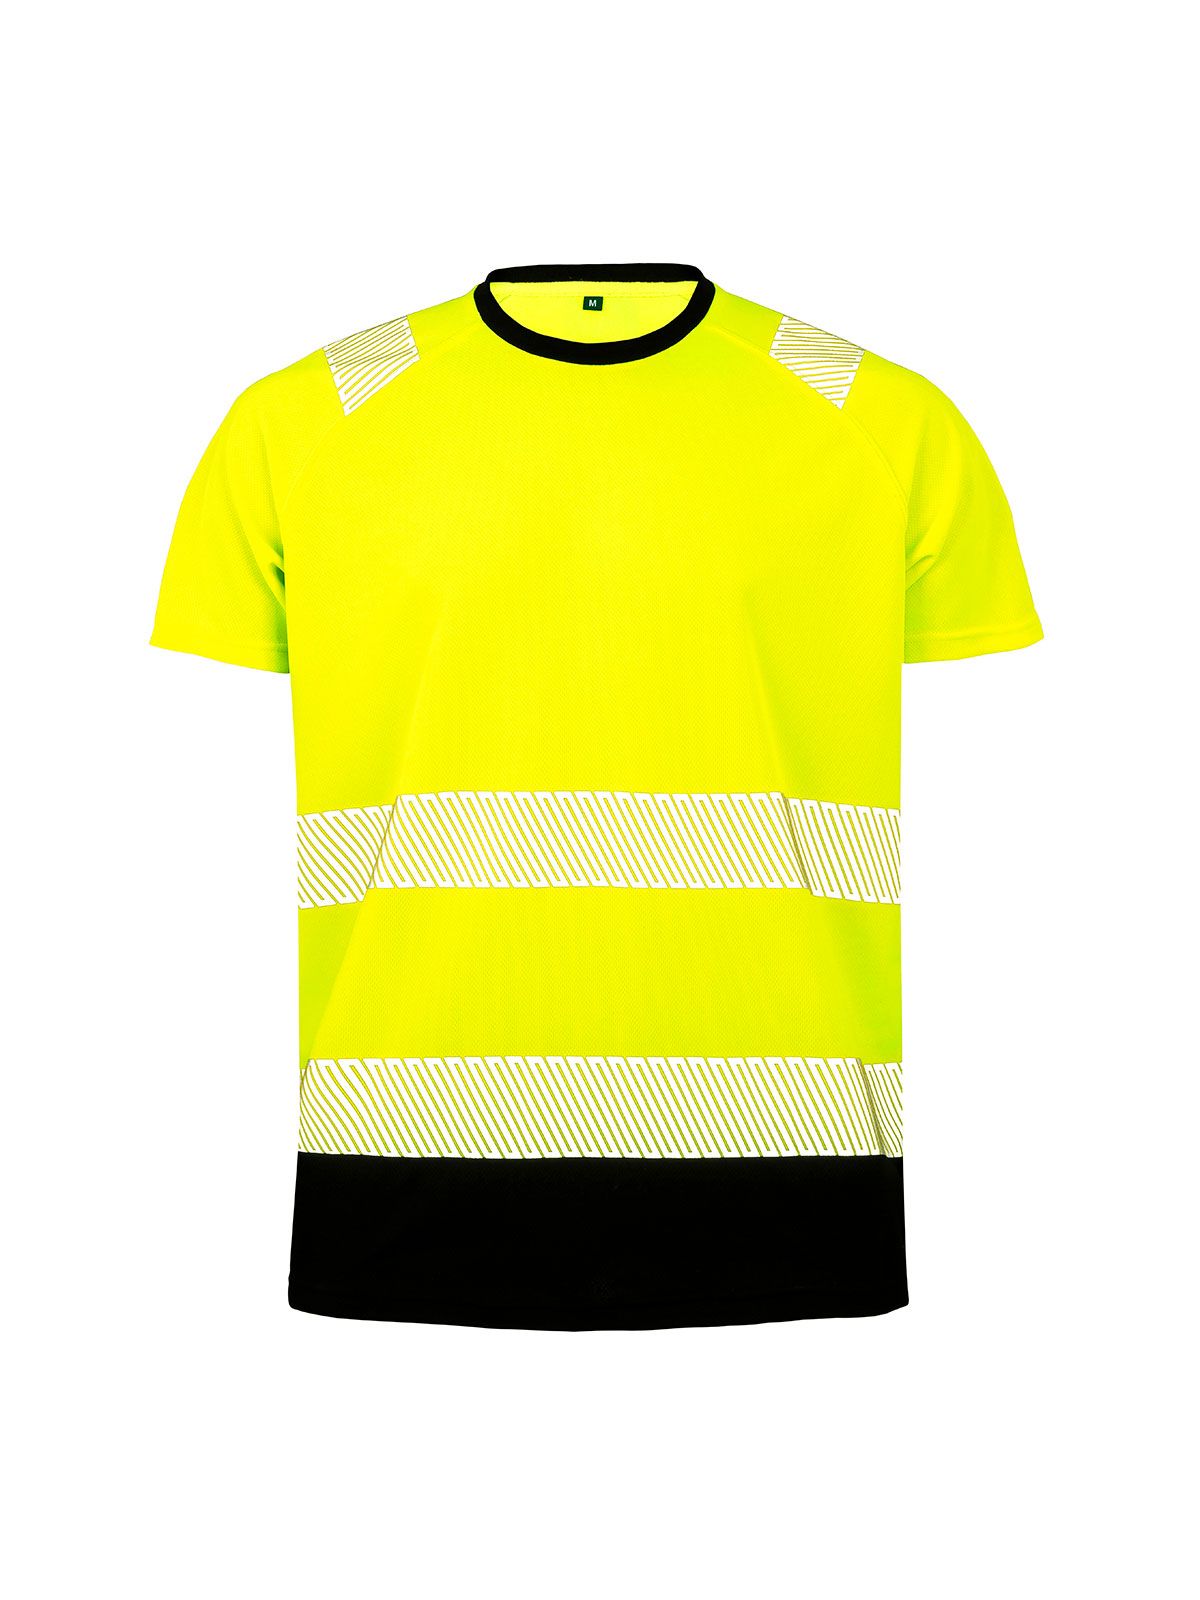 recycled-safety-t-shirt-yellow-black.webp